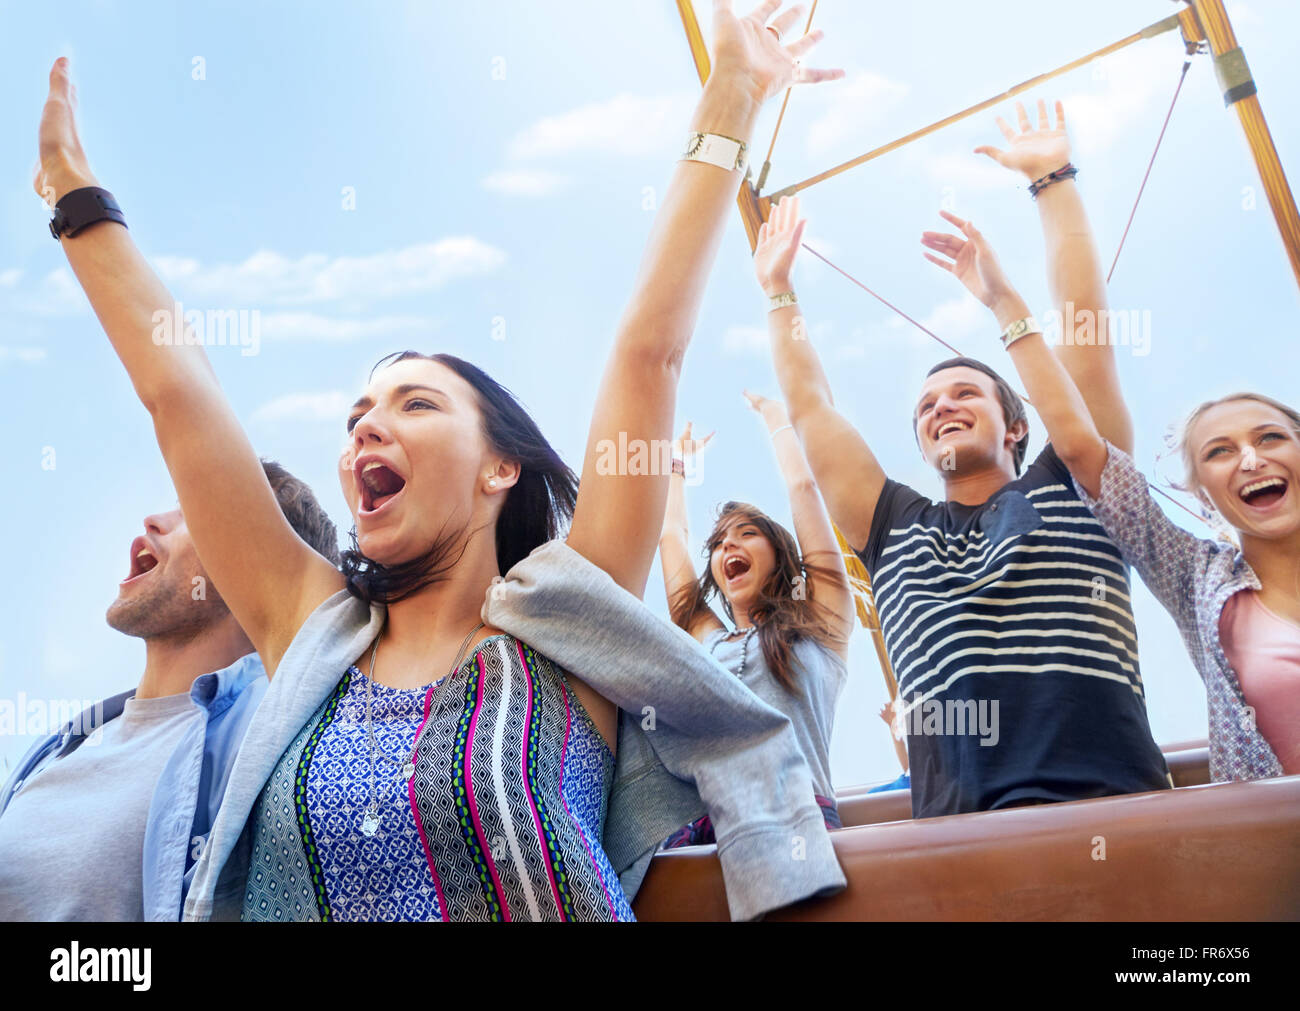 Friends cheering and riding amusement park ride Stock Photo